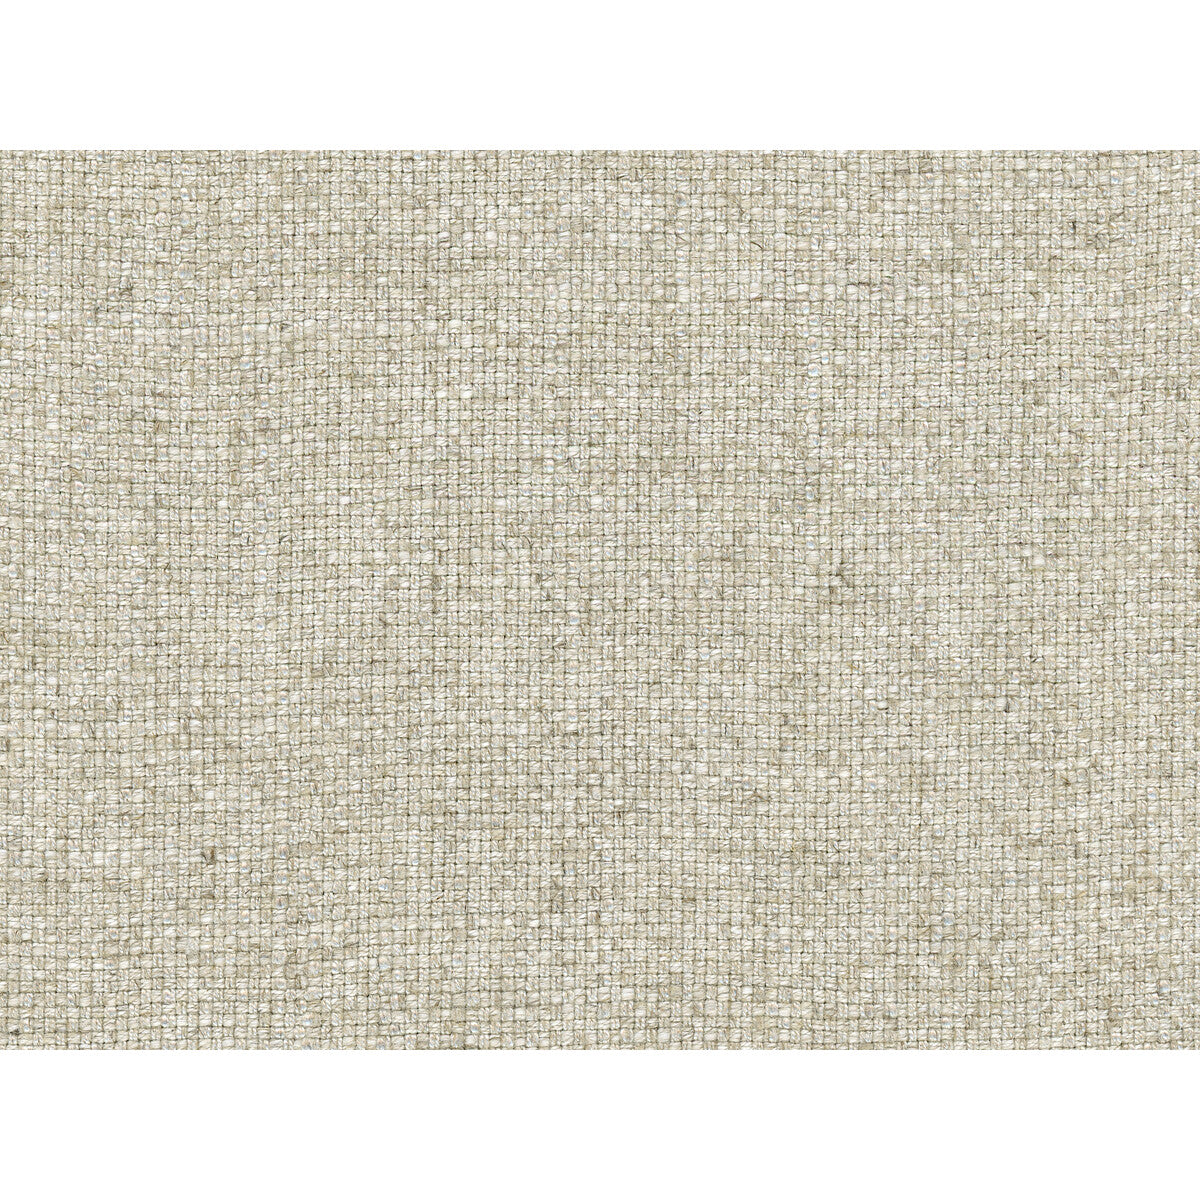 Plush Linen fabric in chardonnay color - pattern 31816.116.0 - by Kravet Couture